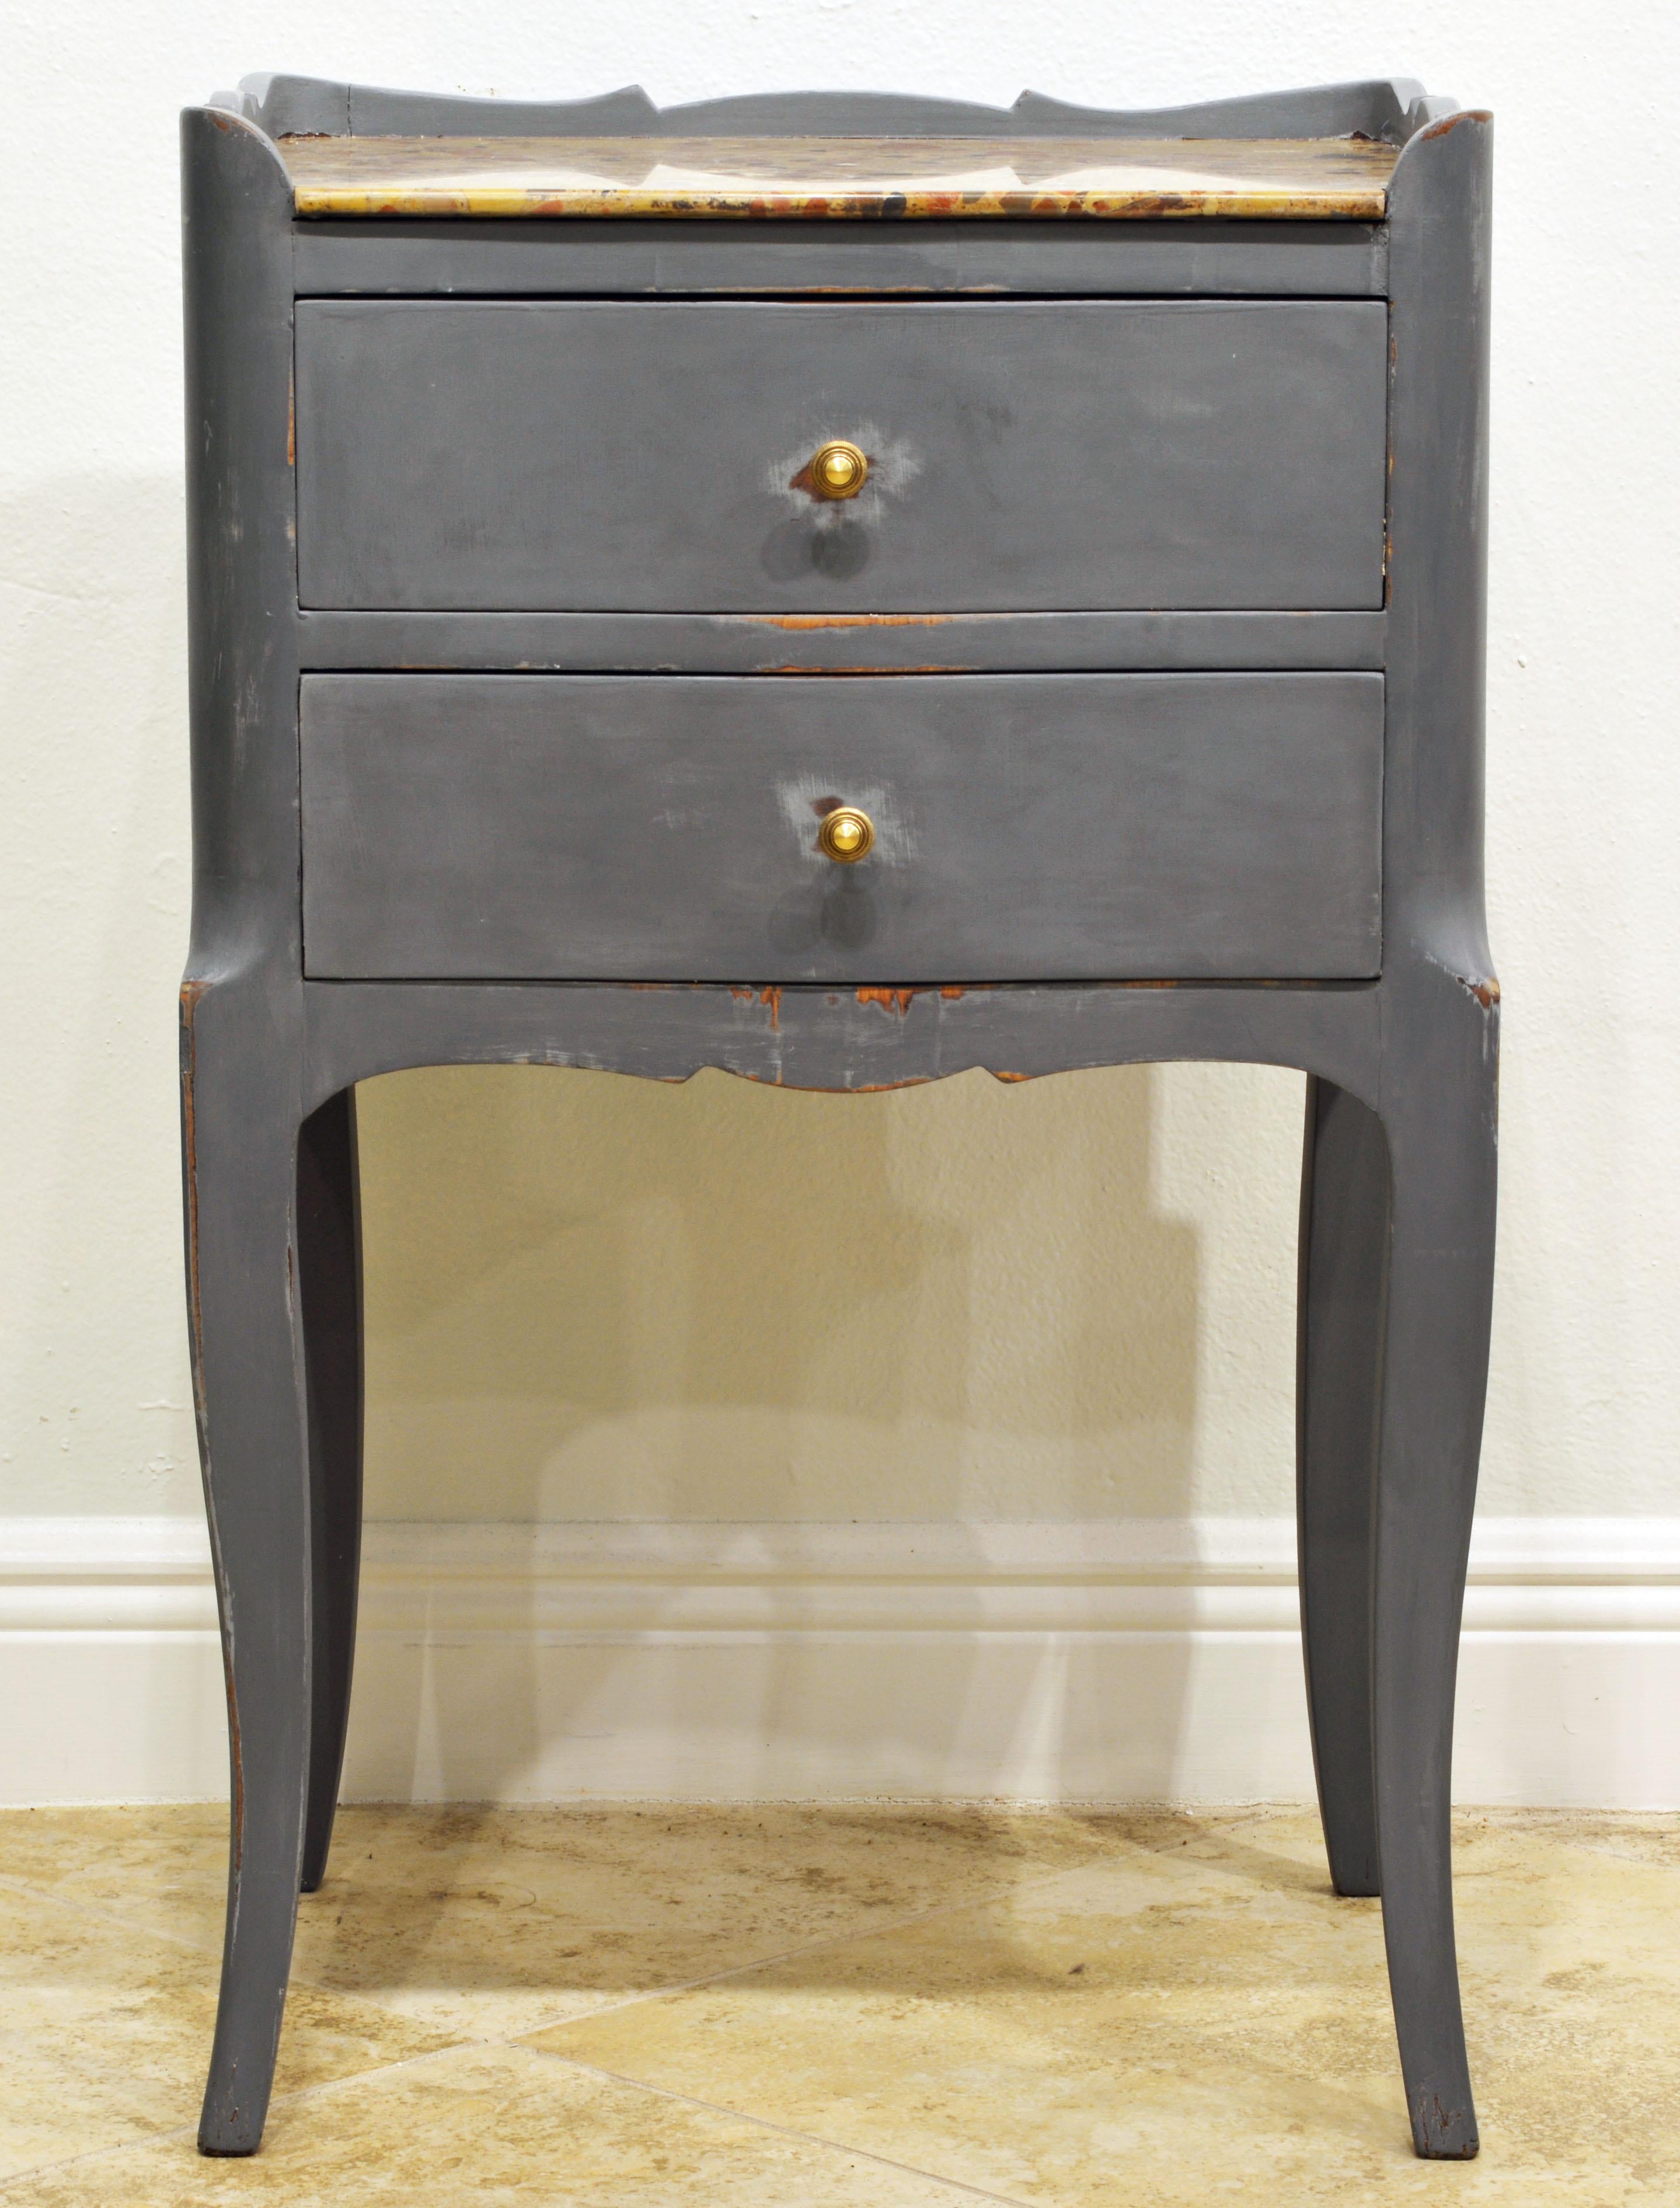 This commode likely dates to the end of the 19th century or the early 20th century. It features a polychrome marble top surrounded on three sides by a scalloped edge above two drawers and resting on elegant cabriole legs. At a later time painted